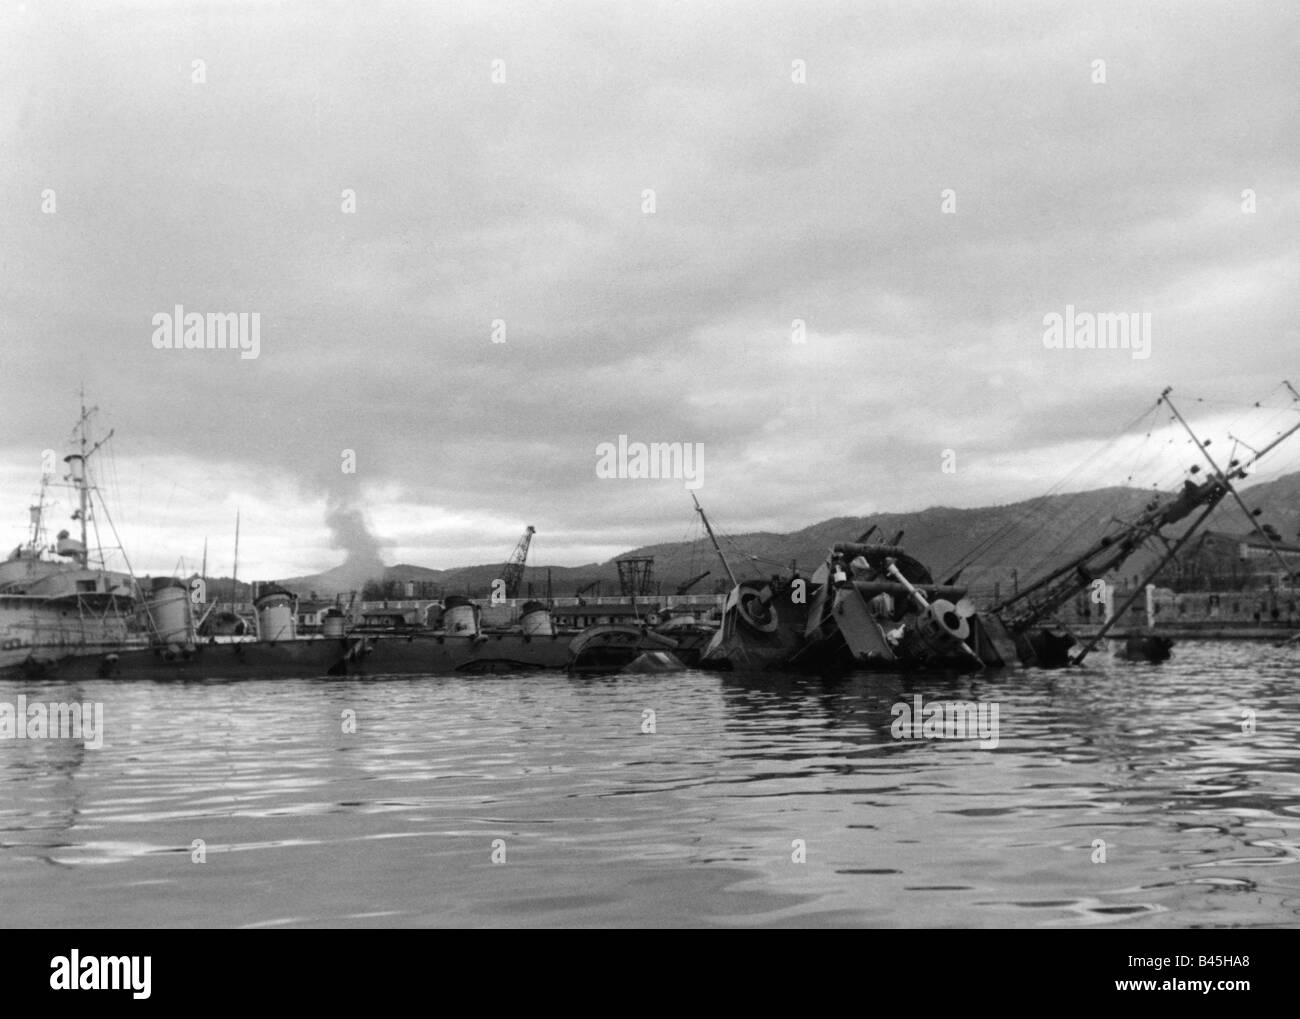 events, Second World War / WWII, France, scuttling of the French fleet ...